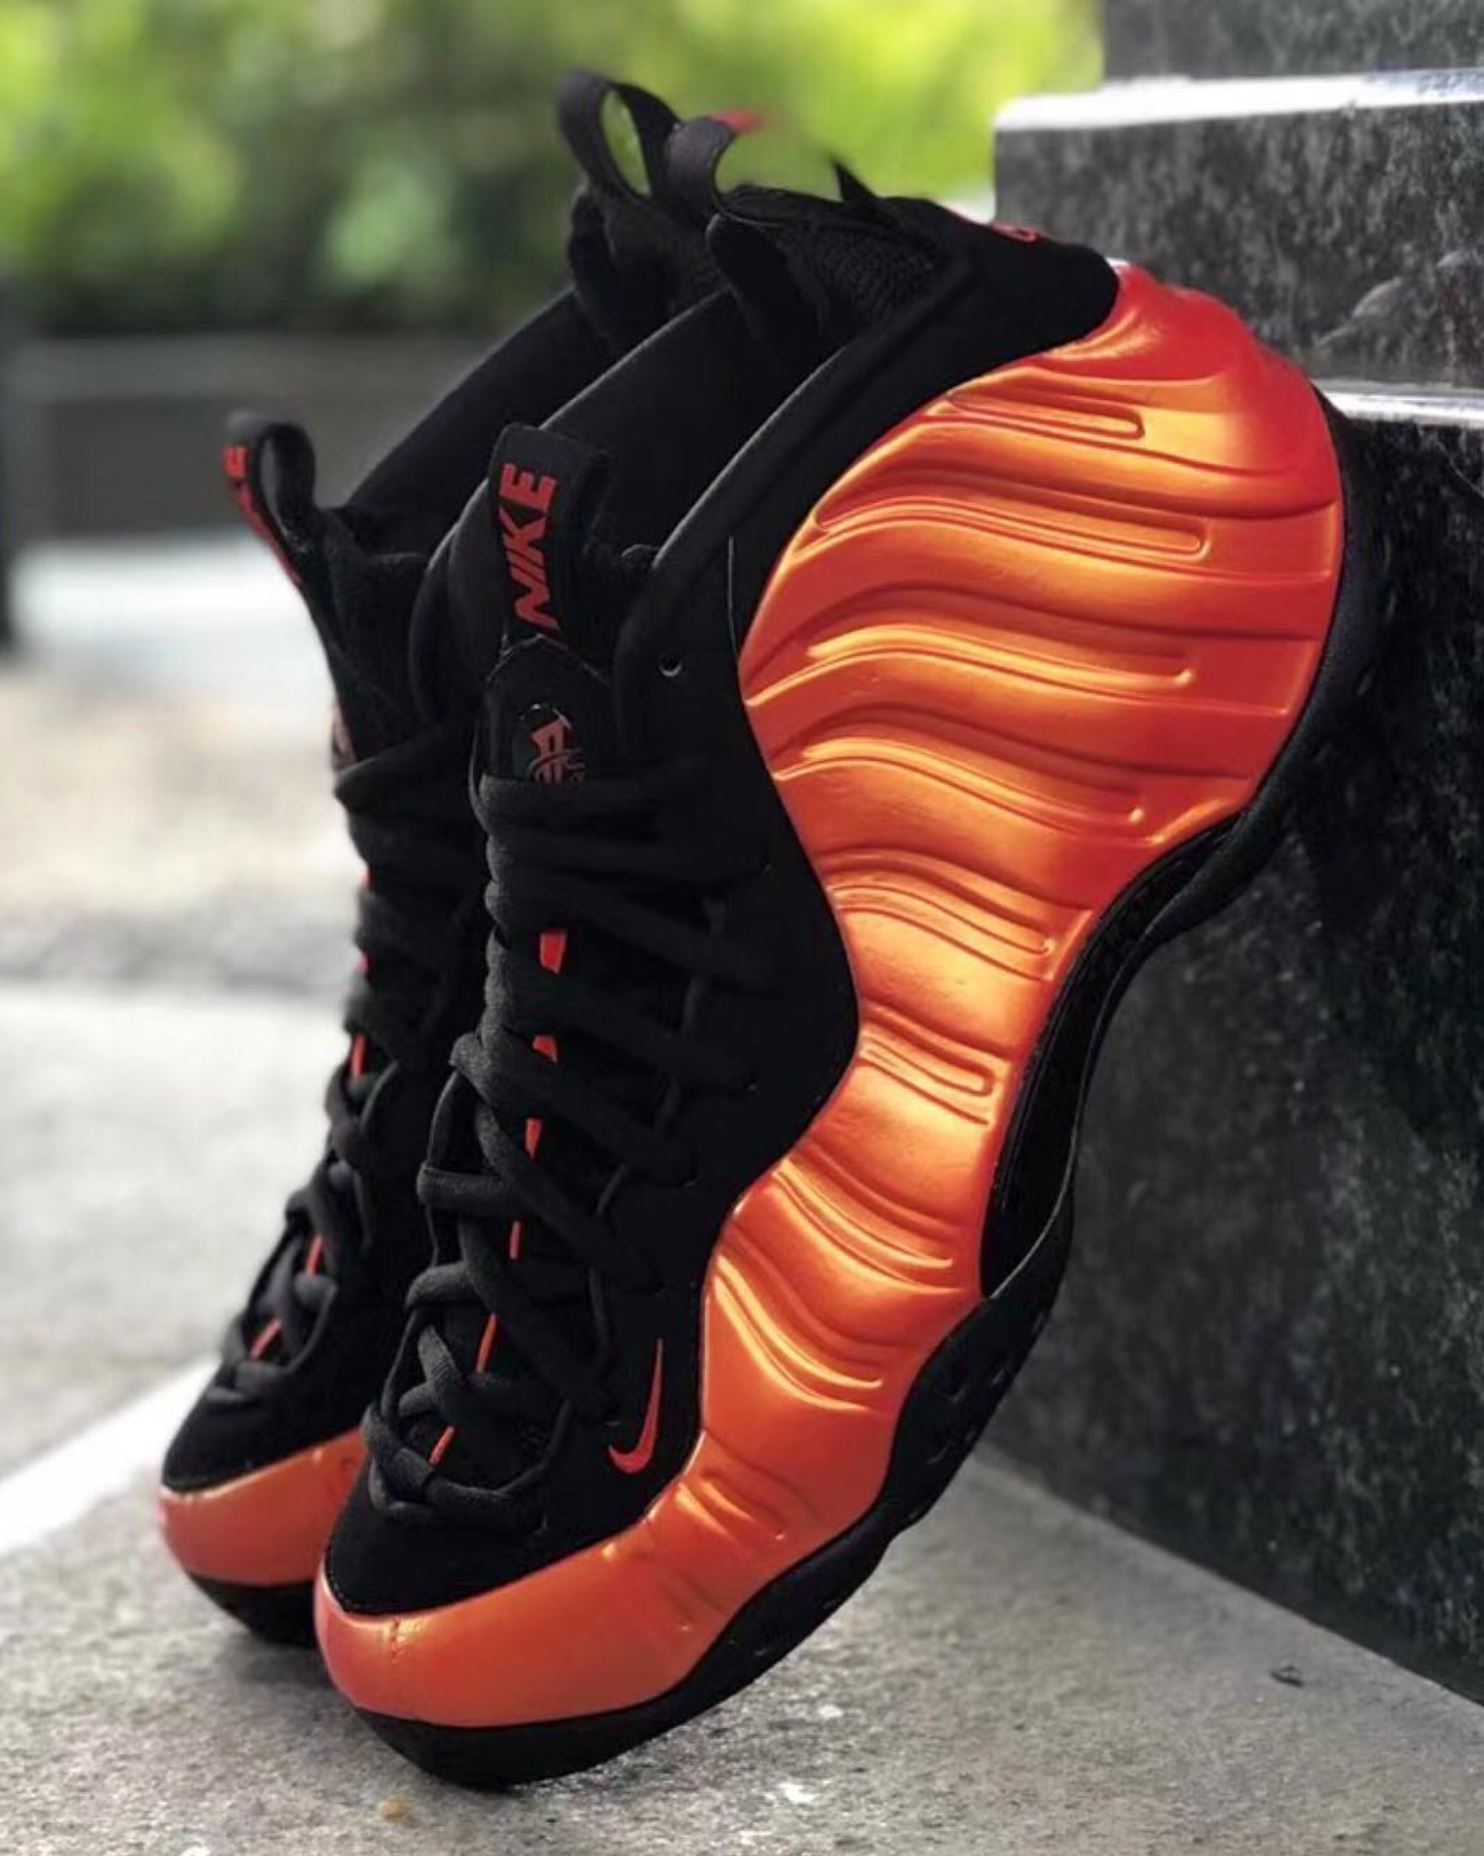 Nike Air Foamposite One 'Habanero Red' Release Date Surfaces